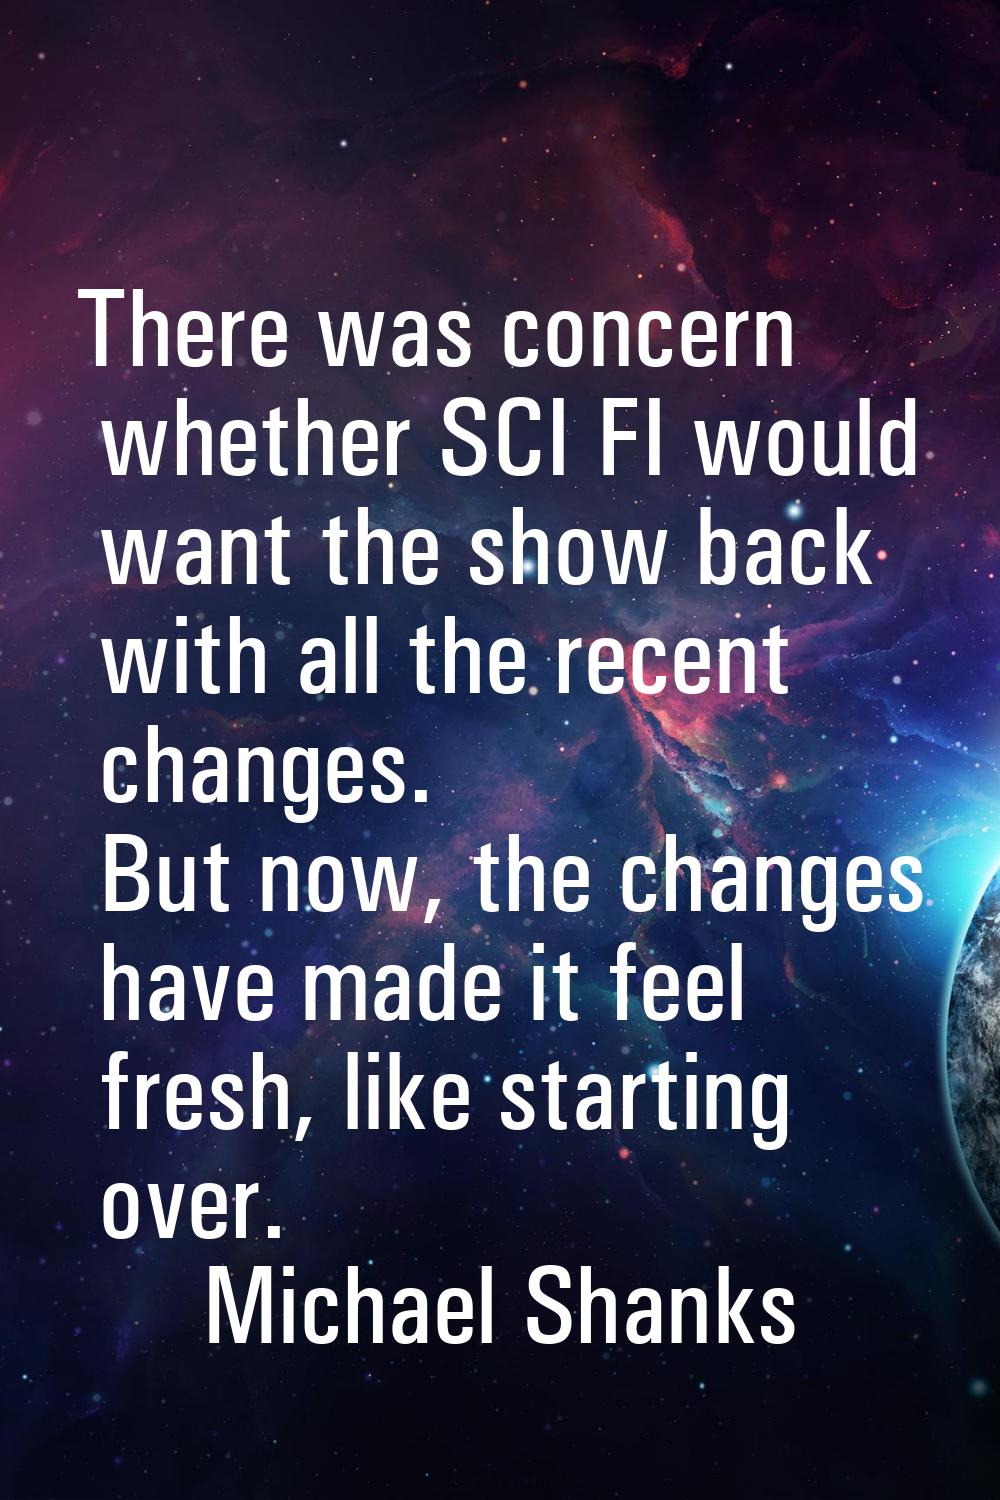 There was concern whether SCI FI would want the show back with all the recent changes. But now, the